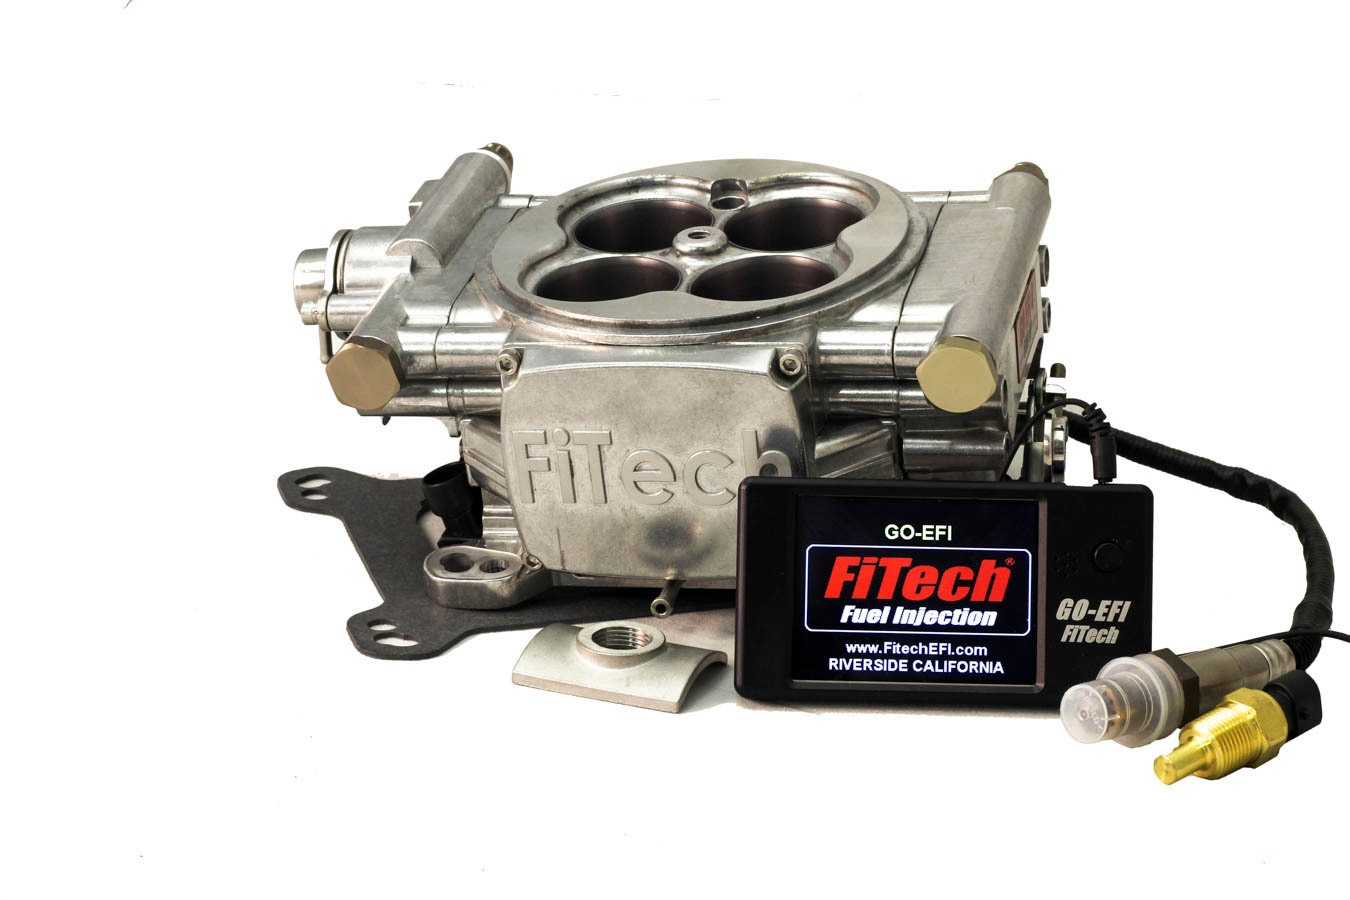 FiTech Fuel Injection 30001 Fuel Injection, Go EFI 4, Throttle Body, Square Bore, 70 lb/hr Injectors, Aluminum, Polished, Universal, Kit